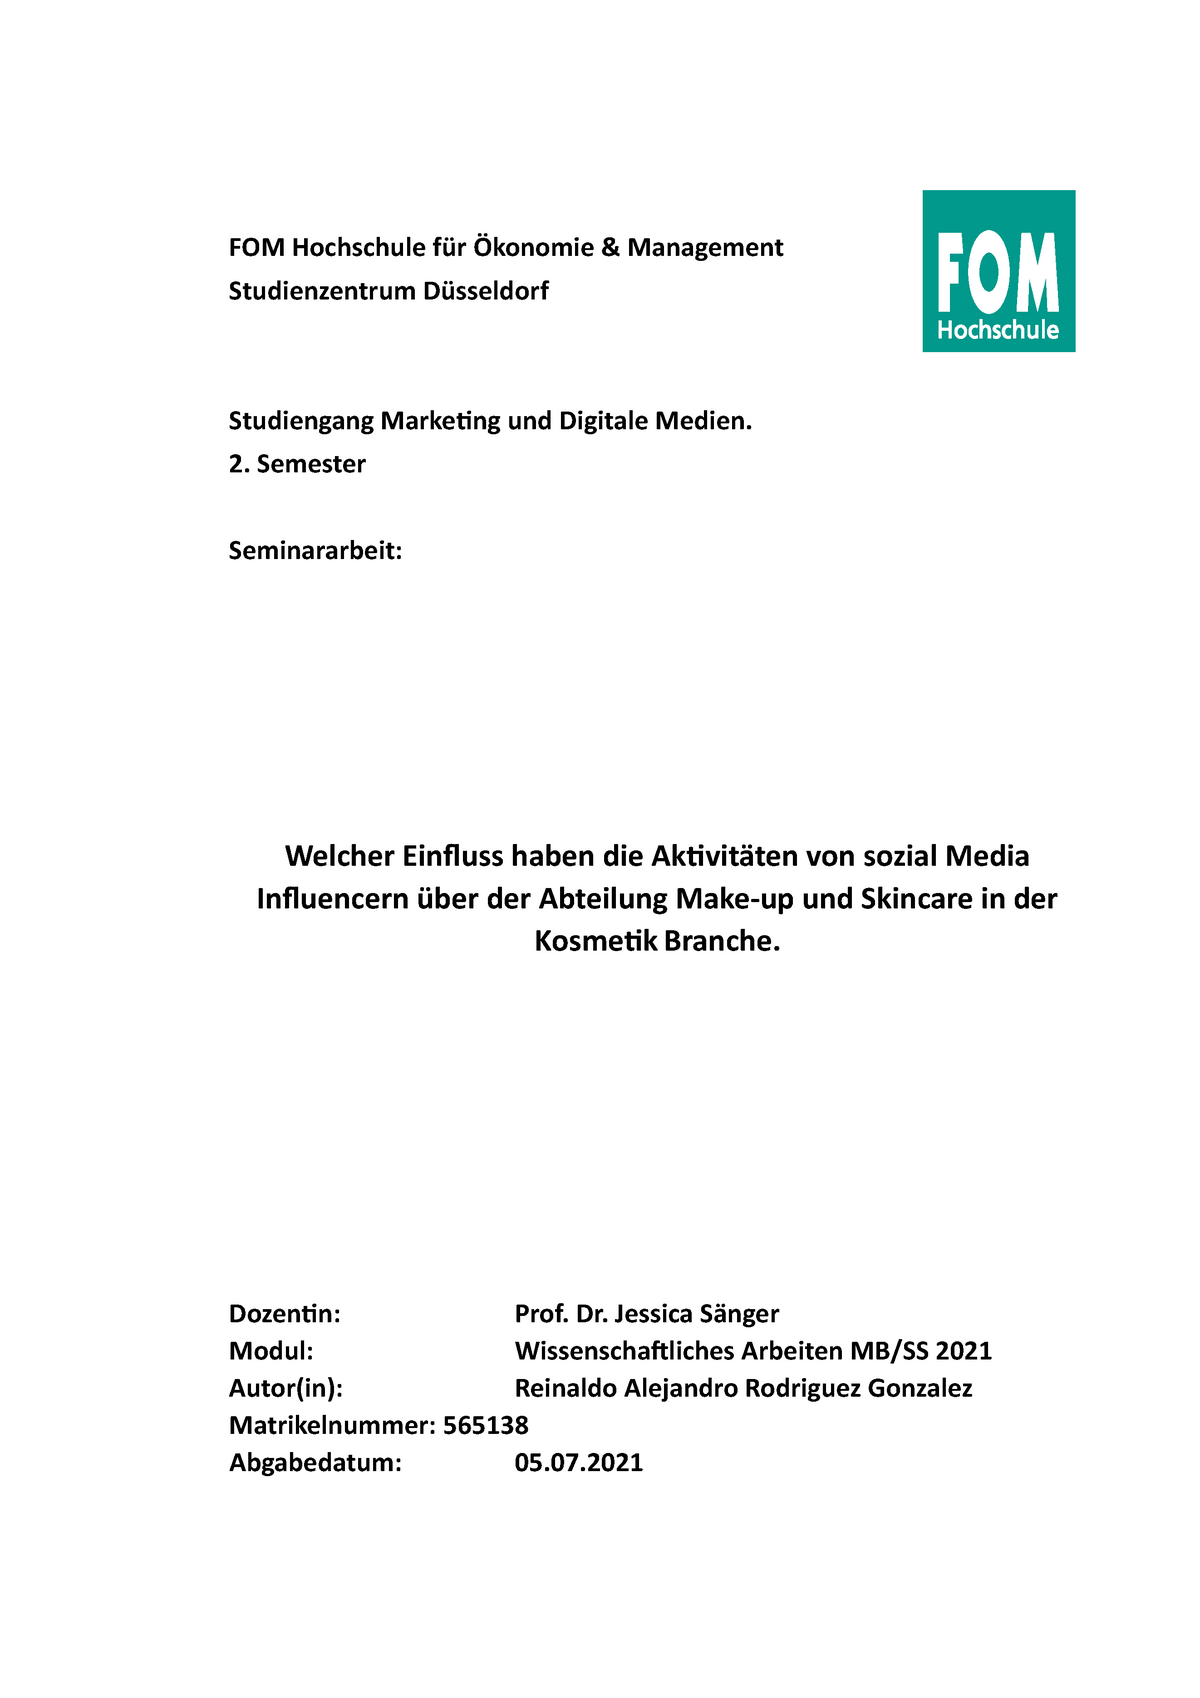 bachelor thesis fom beispiel